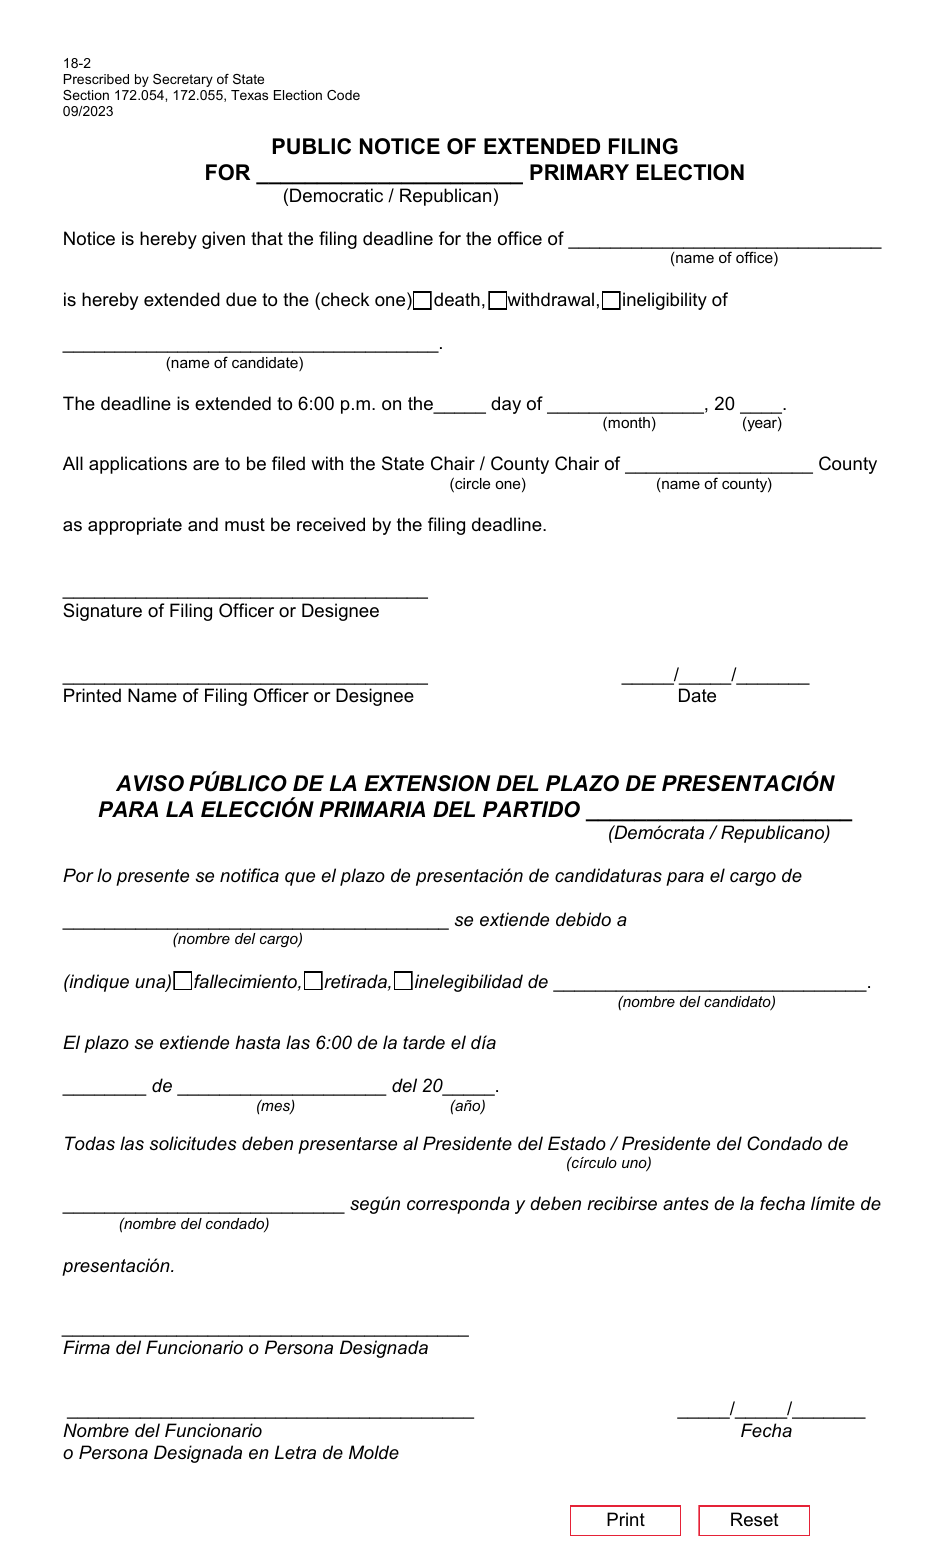 Form 18-2 Public Notice of Extended Filing - Texas (English / Spanish), Page 1